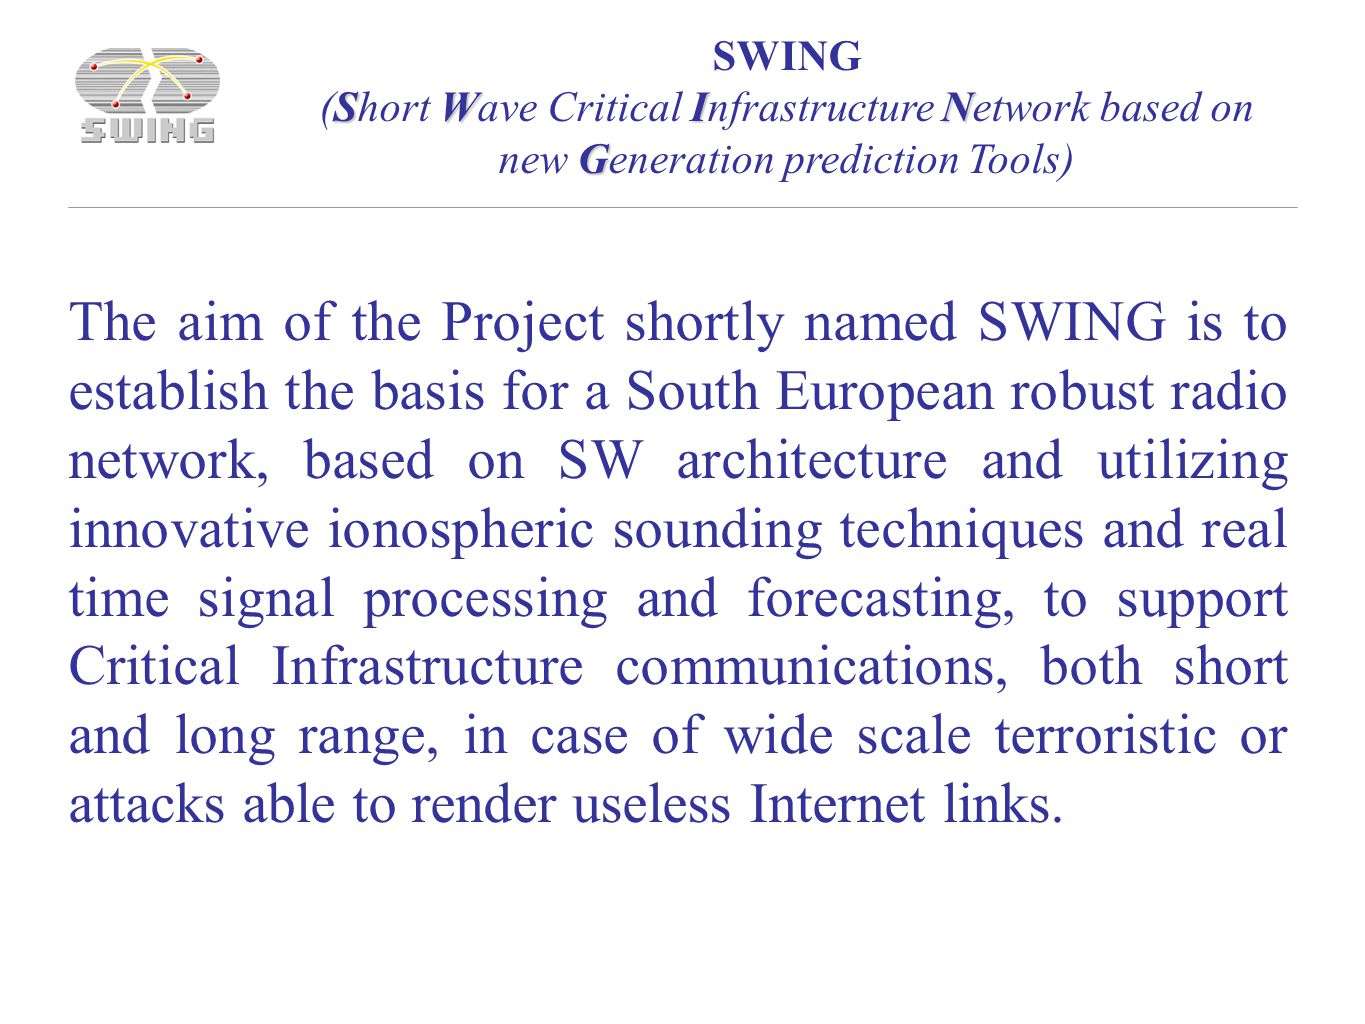 SWING SWIN G (Short Wave Critical Infrastructure Network based on new Generation prediction Tools) The aim of the Project shortly named SWING is to establish the basis for a South European robust radio network, based on SW architecture and utilizing innovative ionospheric sounding techniques and real time signal processing and forecasting, to support Critical Infrastructure communications, both short and long range, in case of wide scale terroristic or attacks able to render useless Internet links.